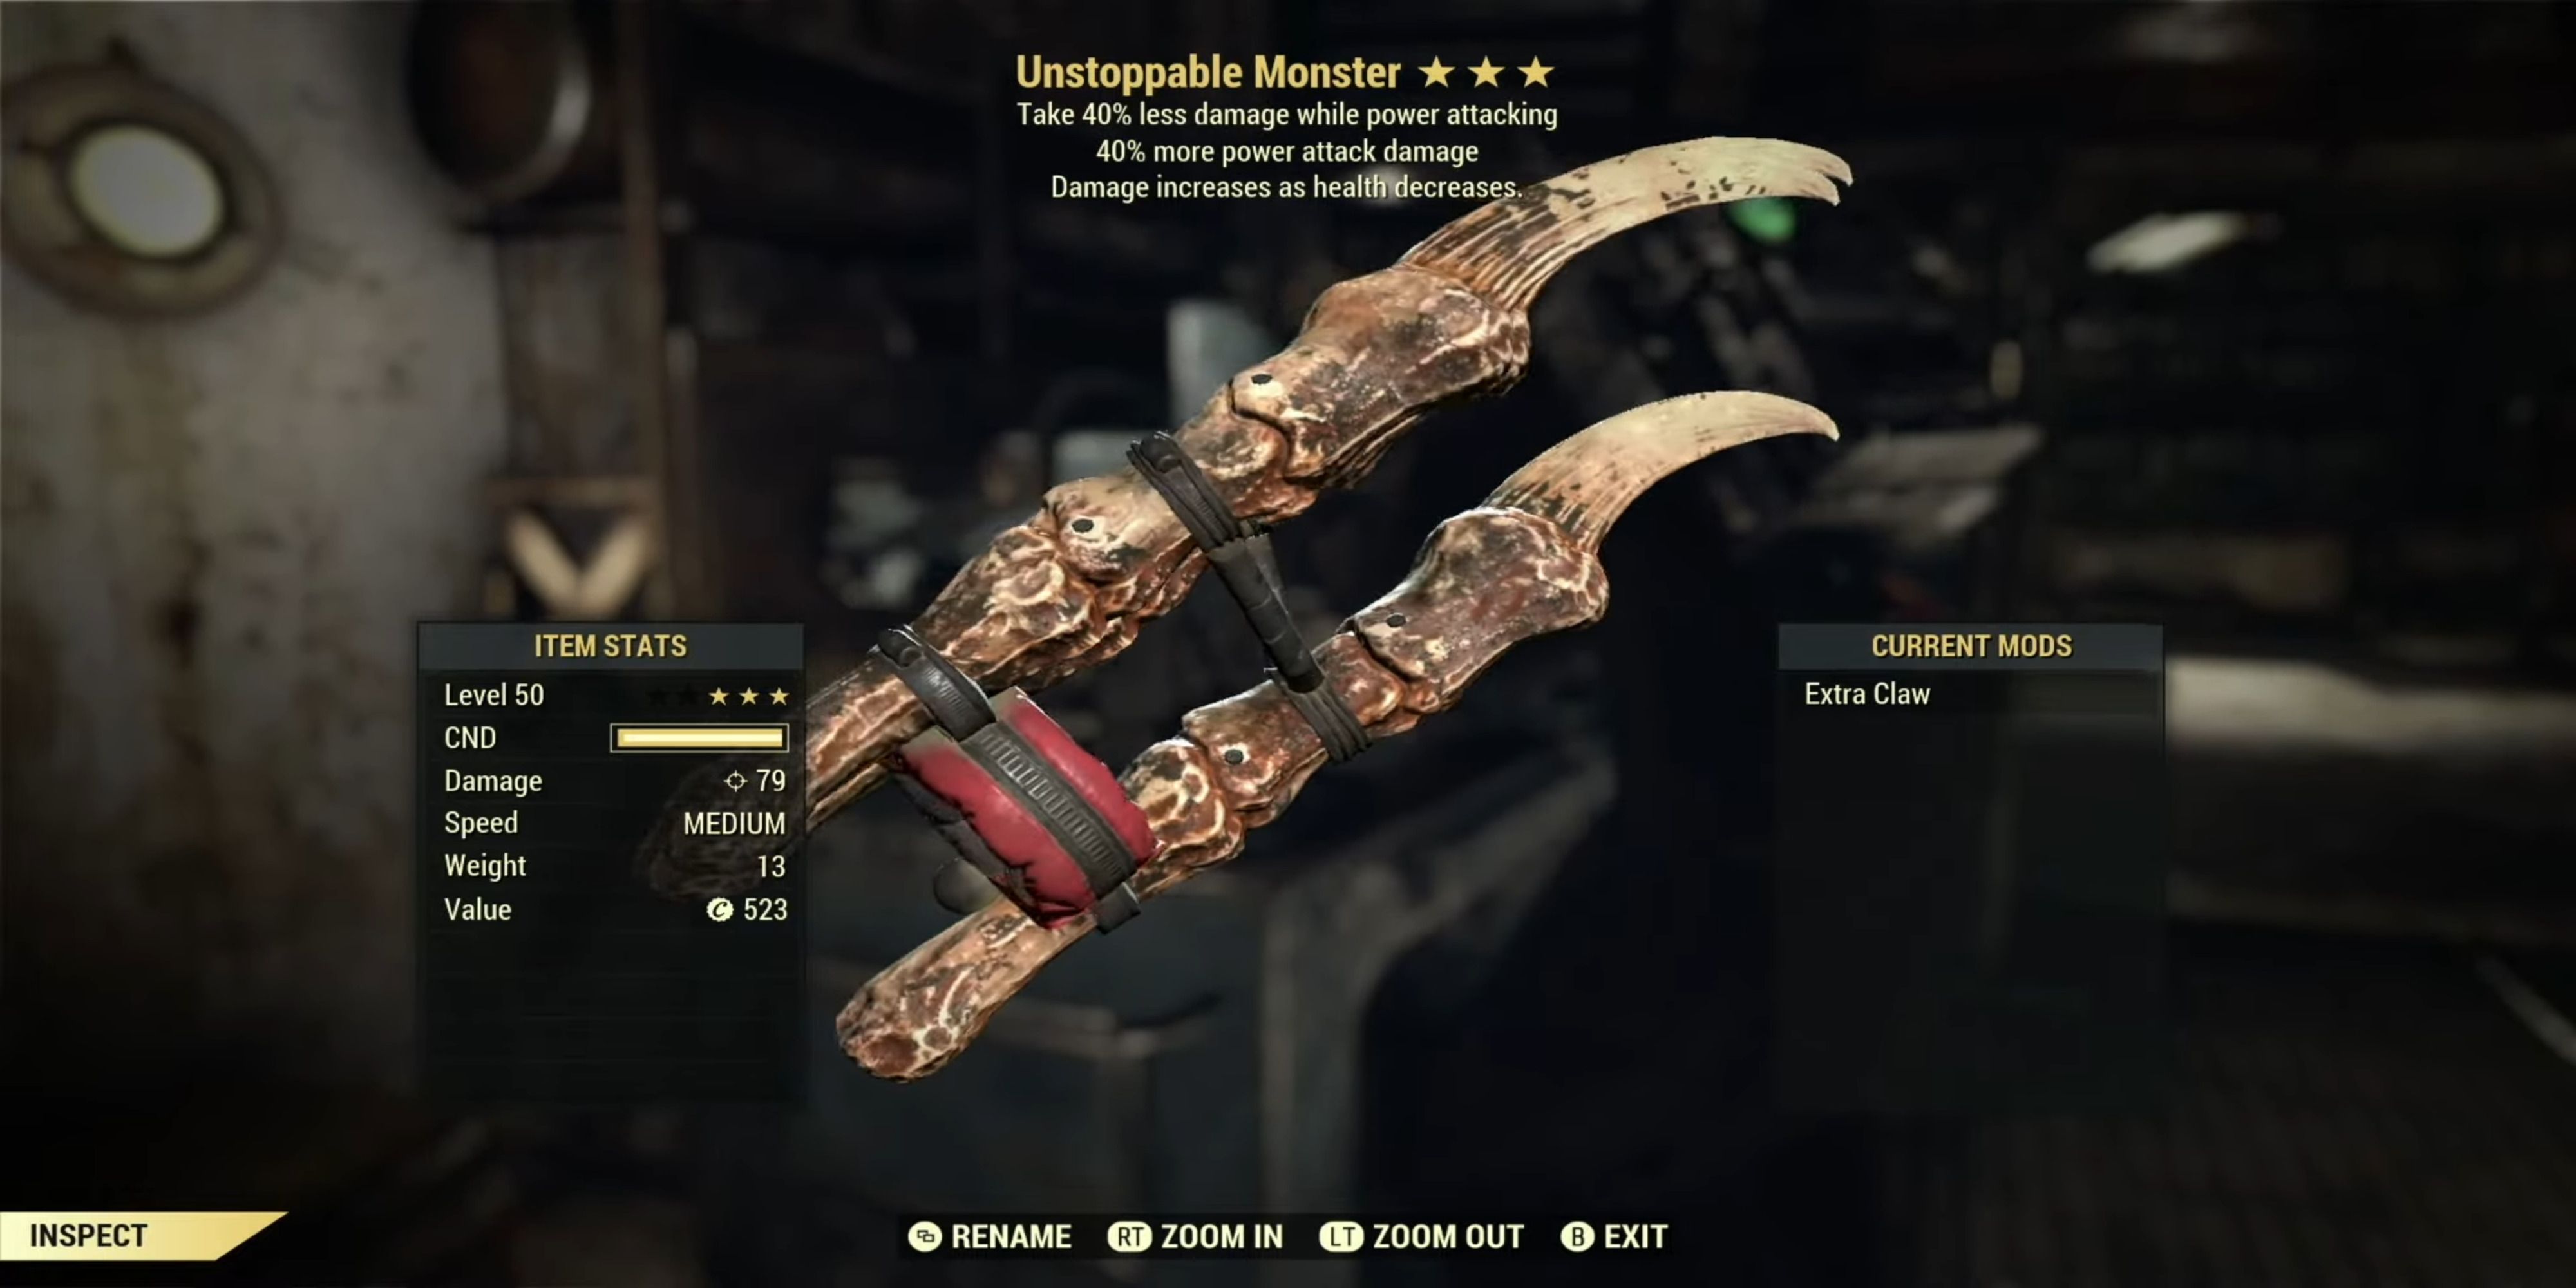 The Unstoppable Monster melee weapon in Fallout 76